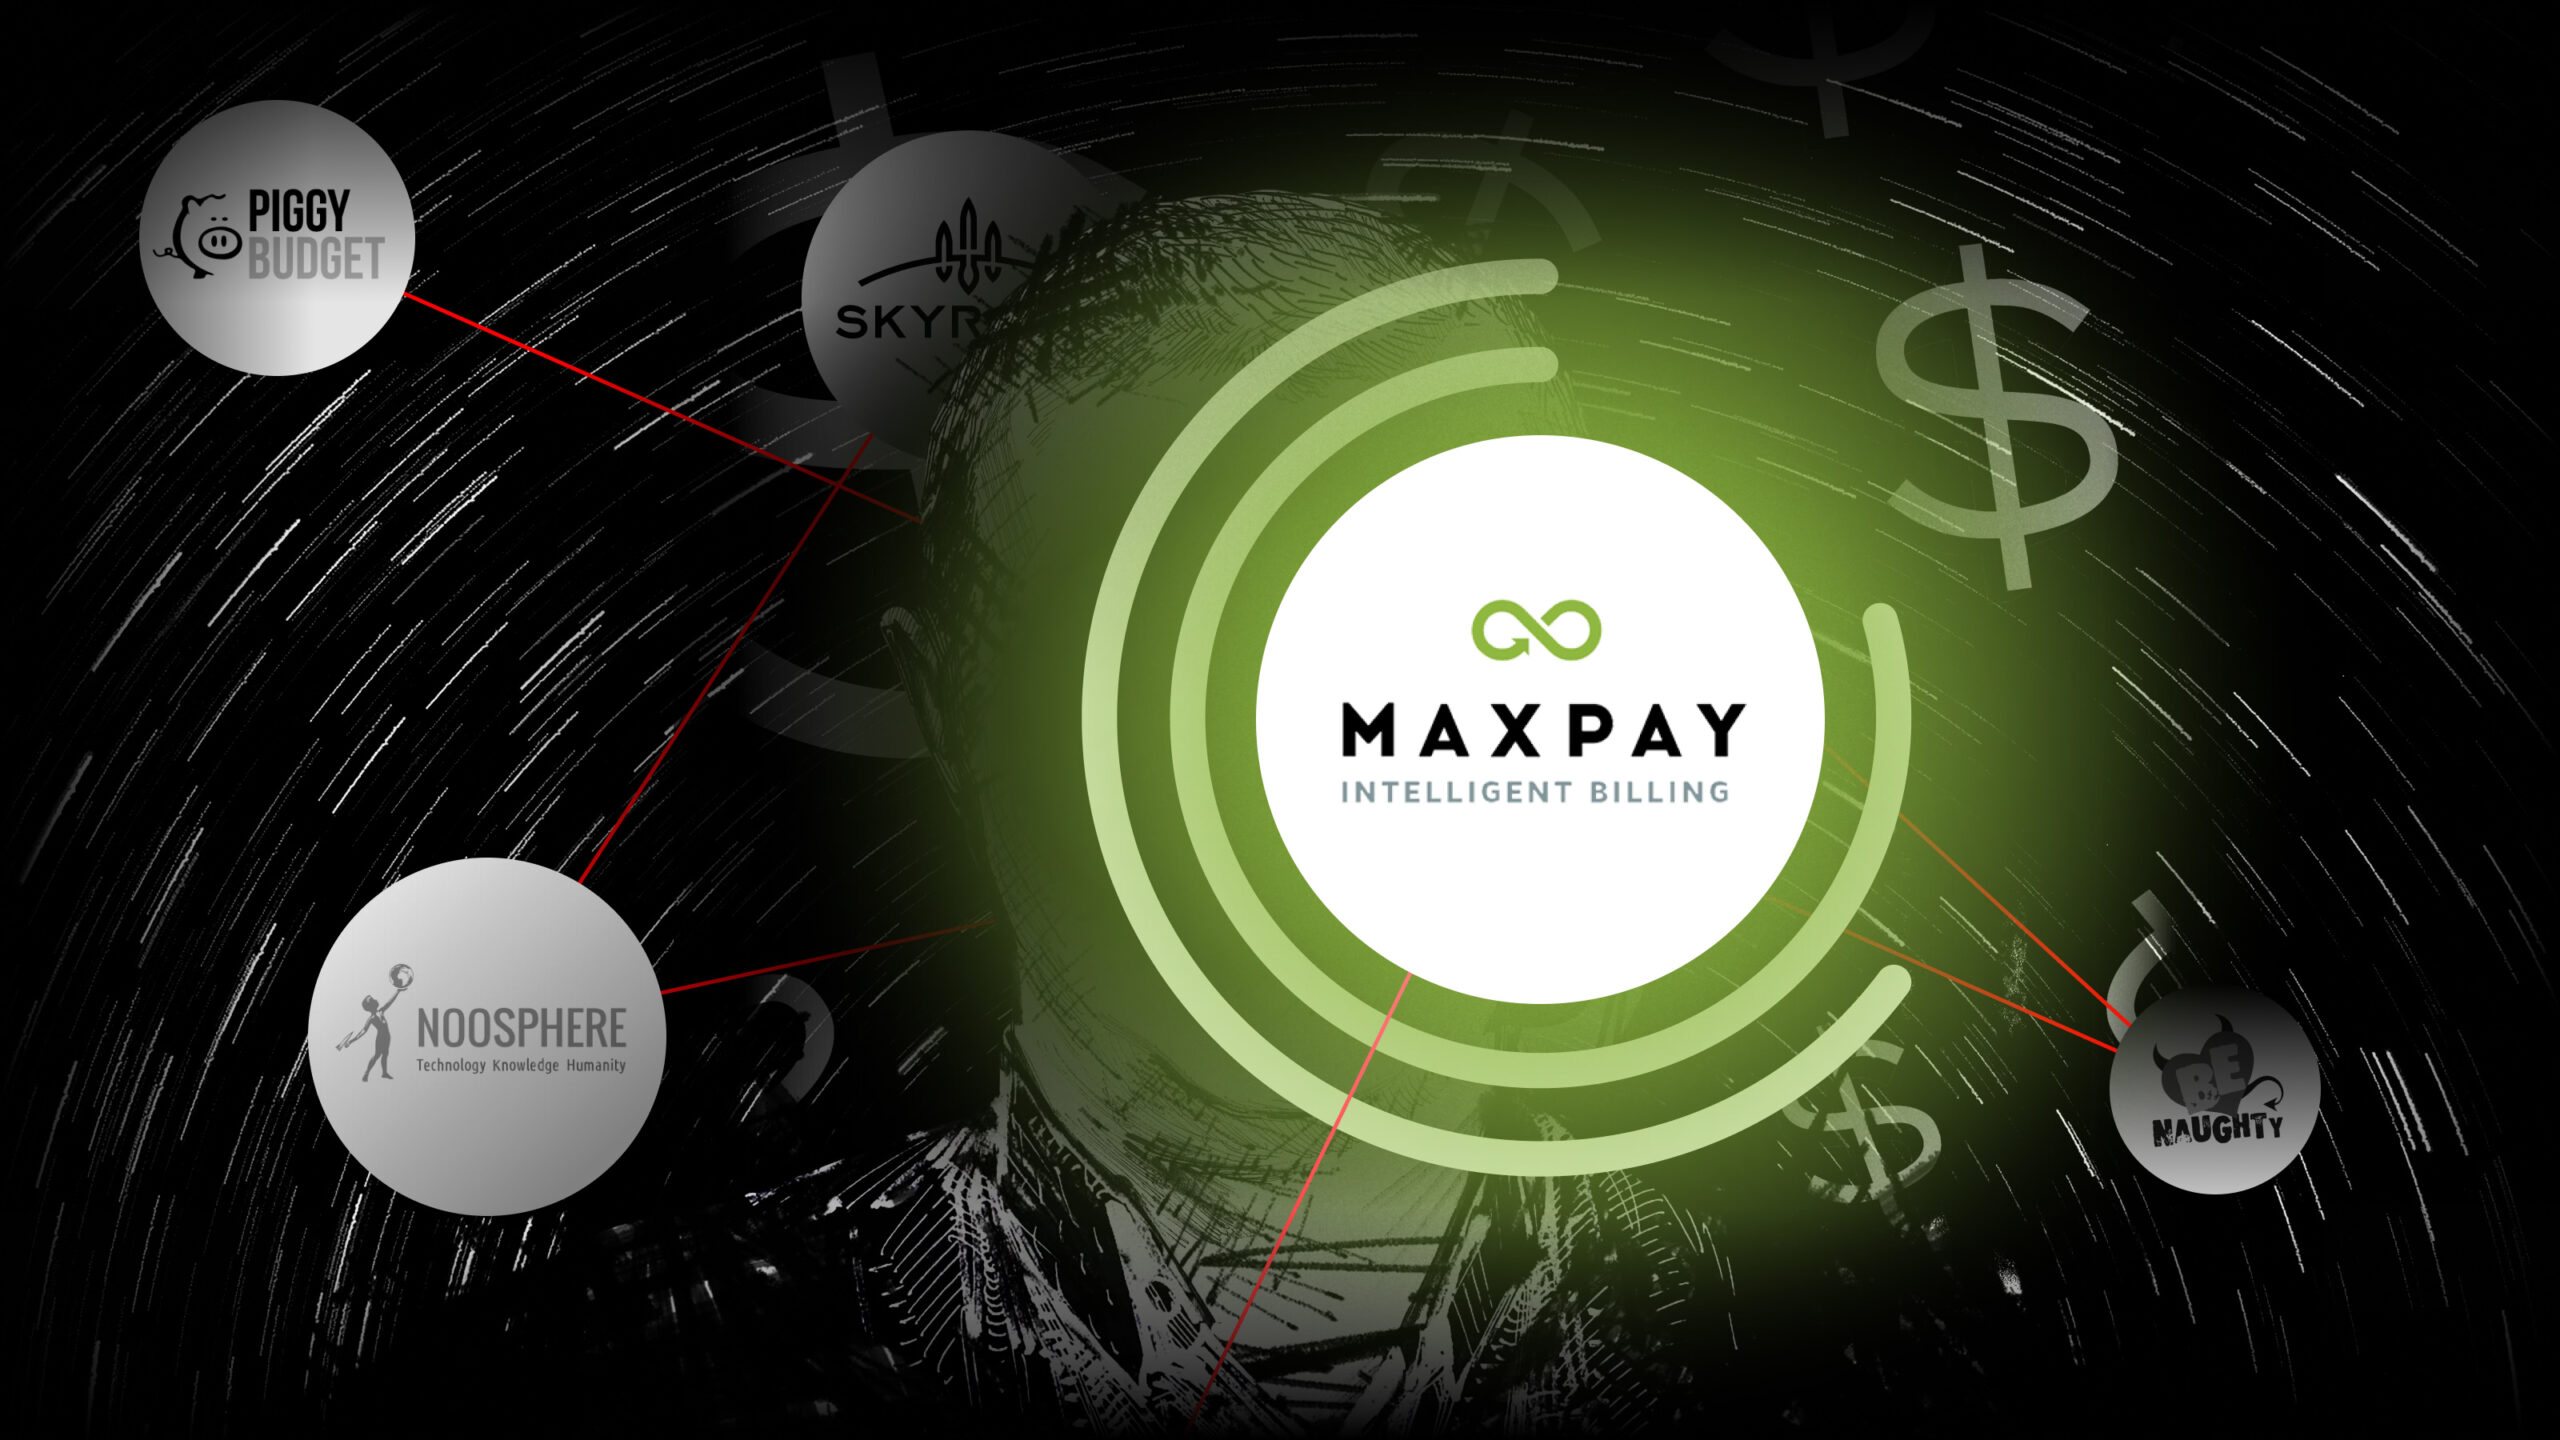 Illustration of a figure with face obscured by a glowing green Maxpay logo. In the background are the logos of other companies discussed in this series connected by red lines.